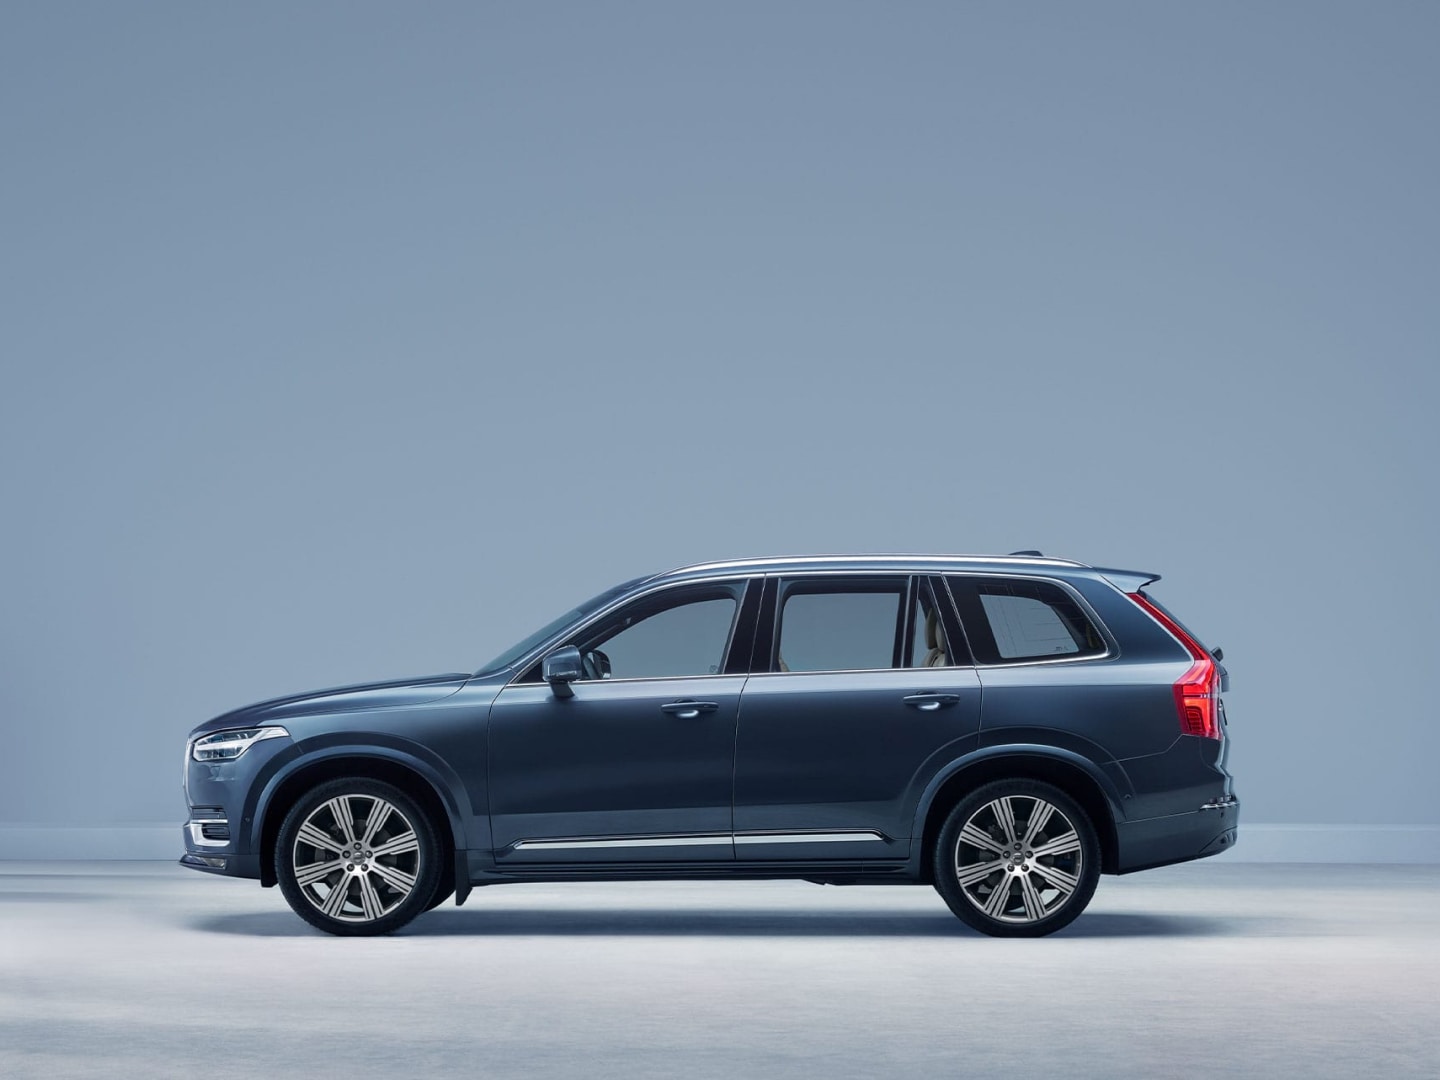 The side profile of a Volvo XC90 SUV.